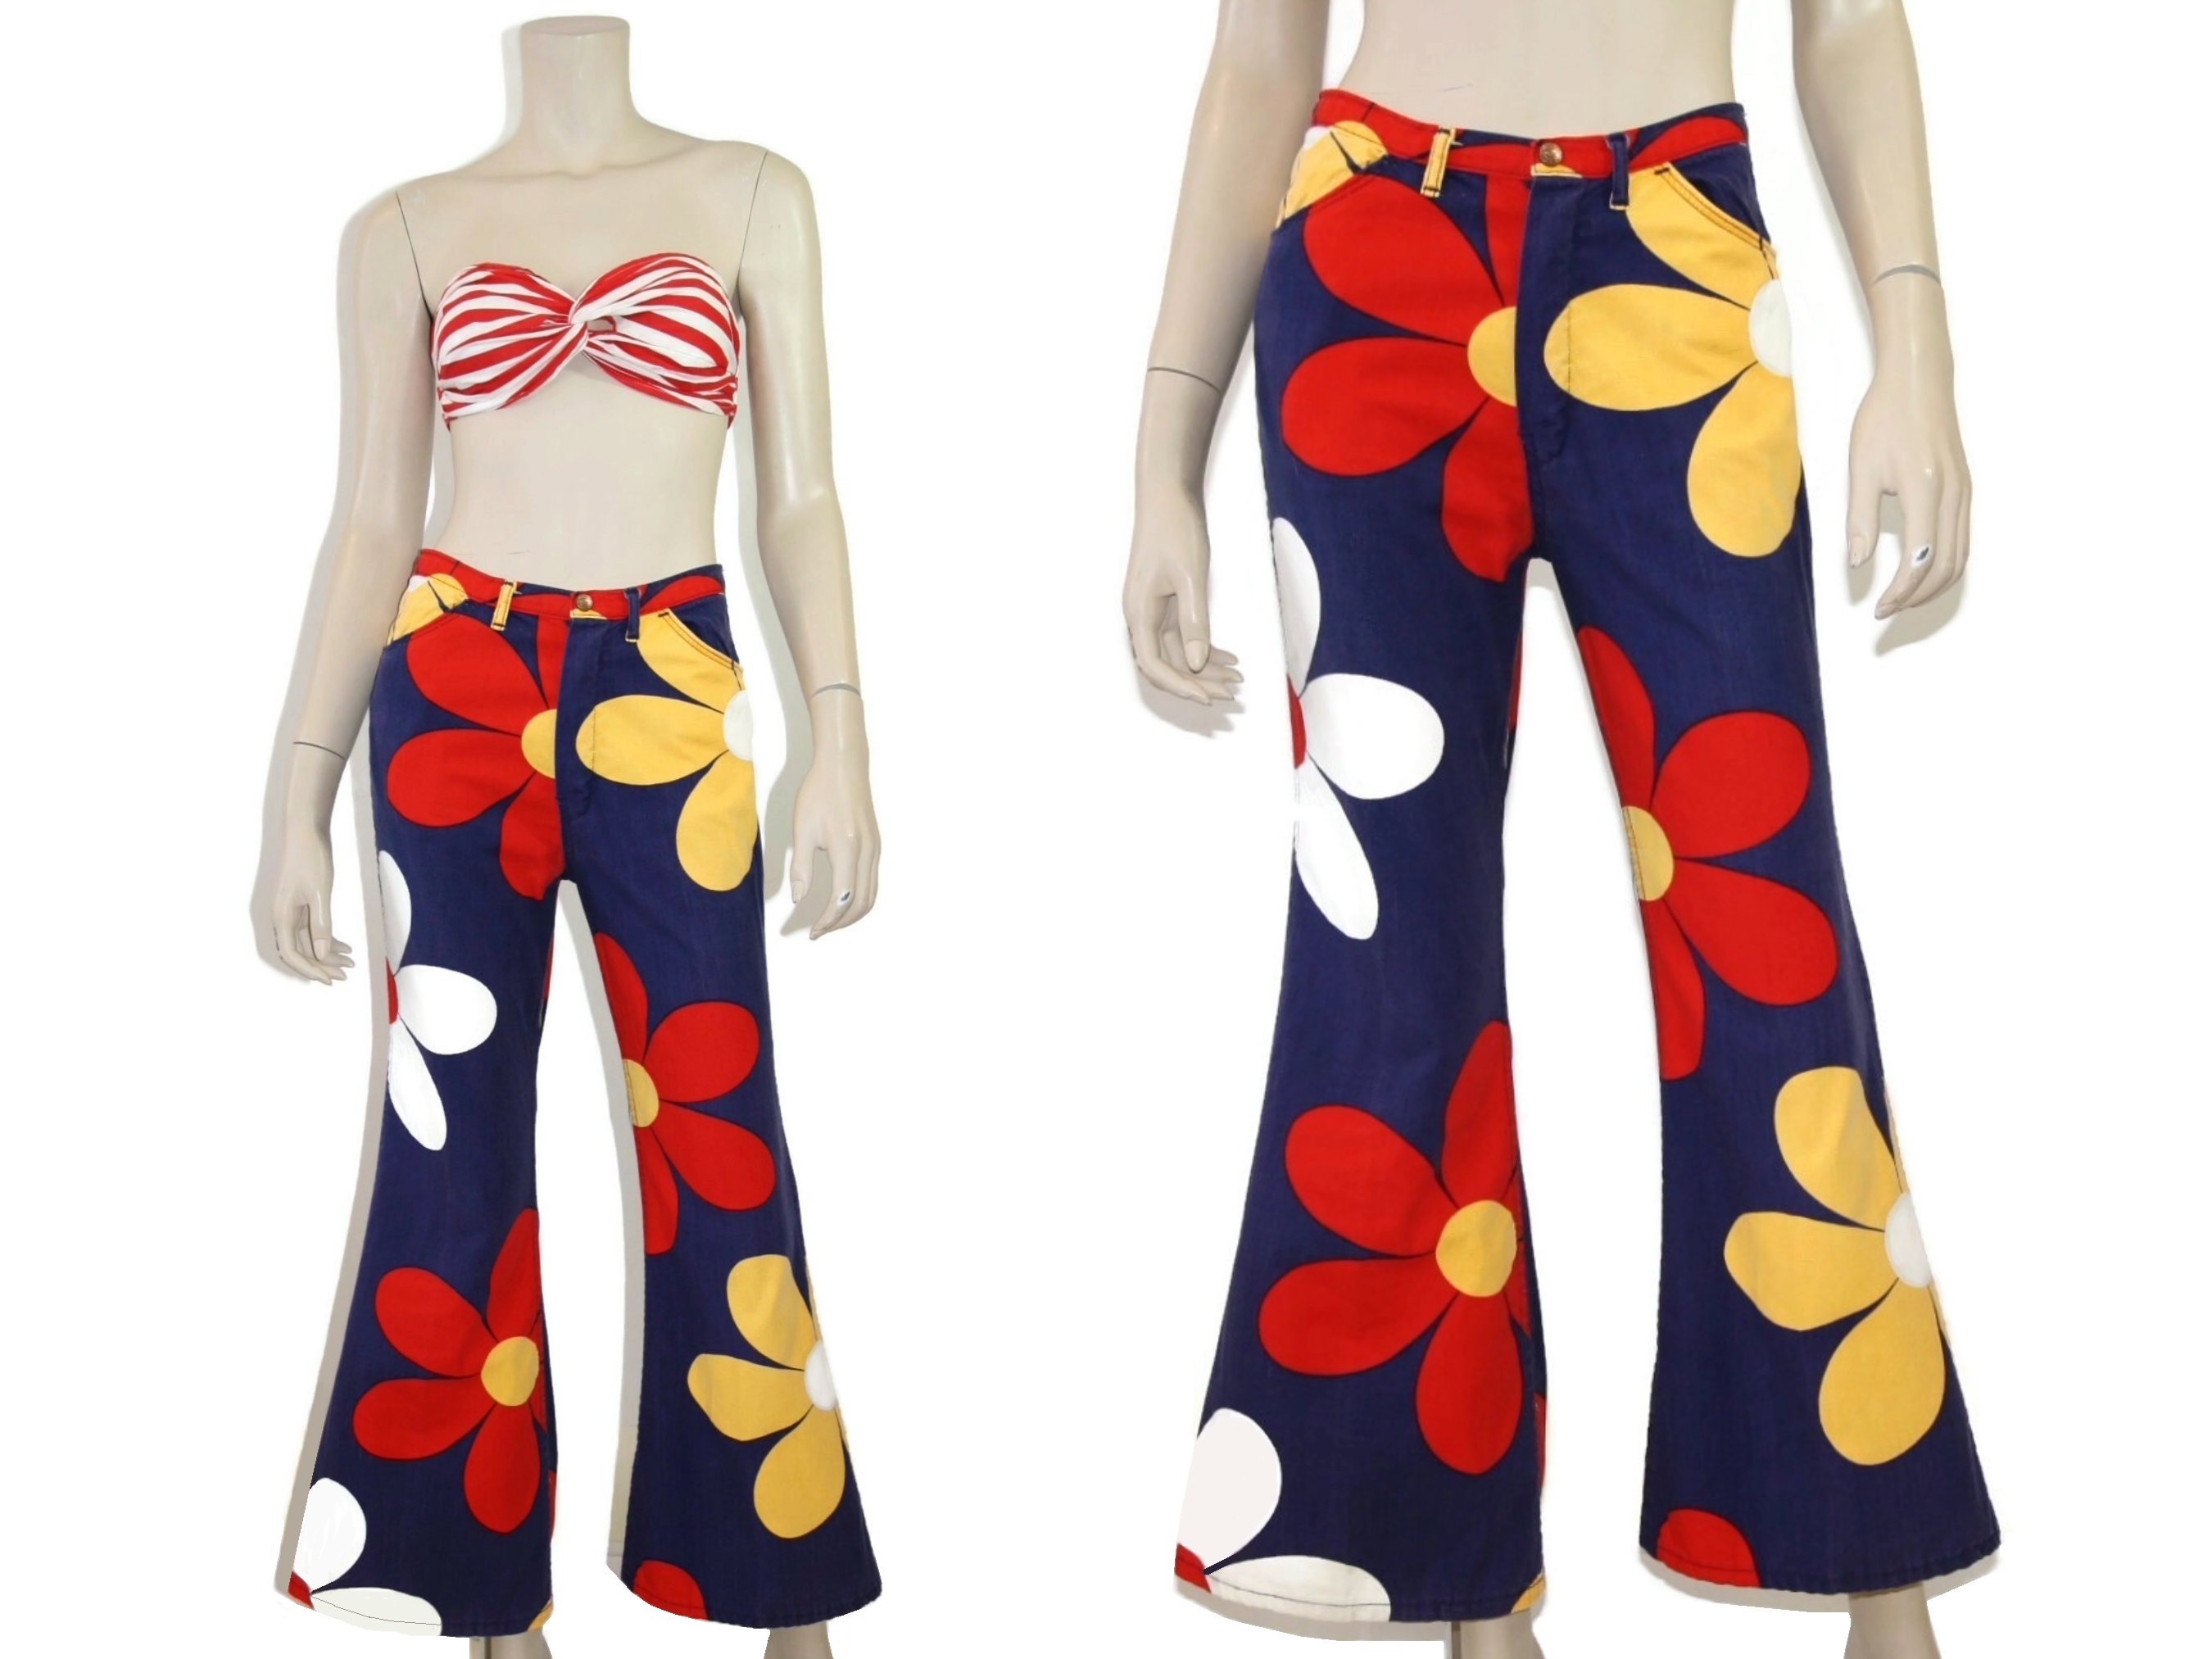 Vintage 60s 70s Flower Power Bell Bottom Pants, 1960s 1970s Twill Denim  Bellbottom Trousers, Psychedelic Floral Retro Flare Jeans Xs Small S 